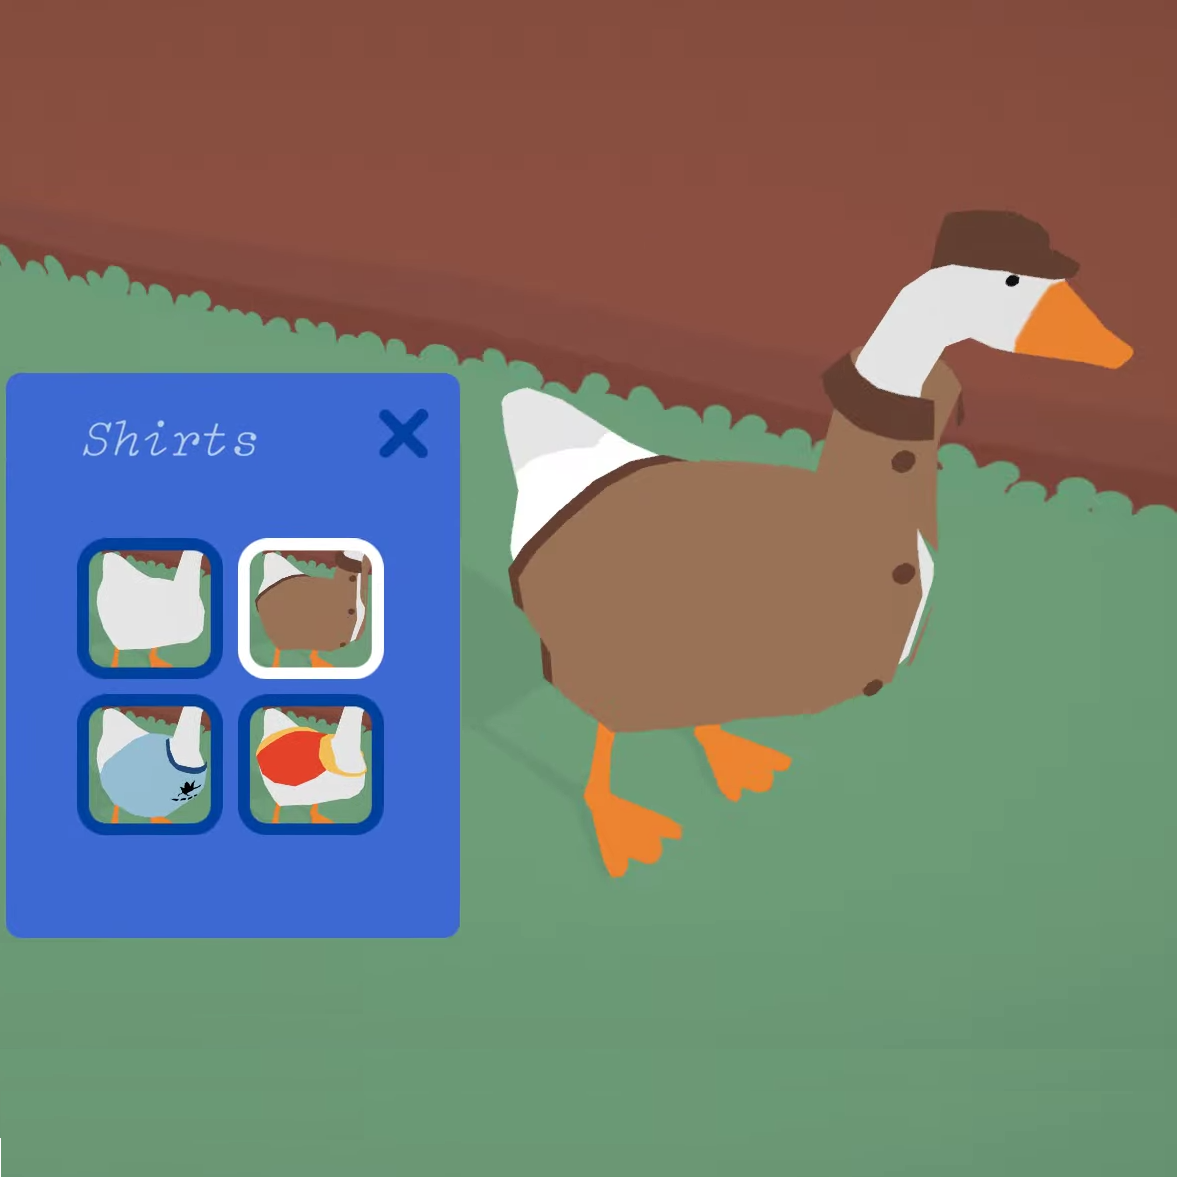 Teaching with videogames: exploring character with 'Untitled Goose